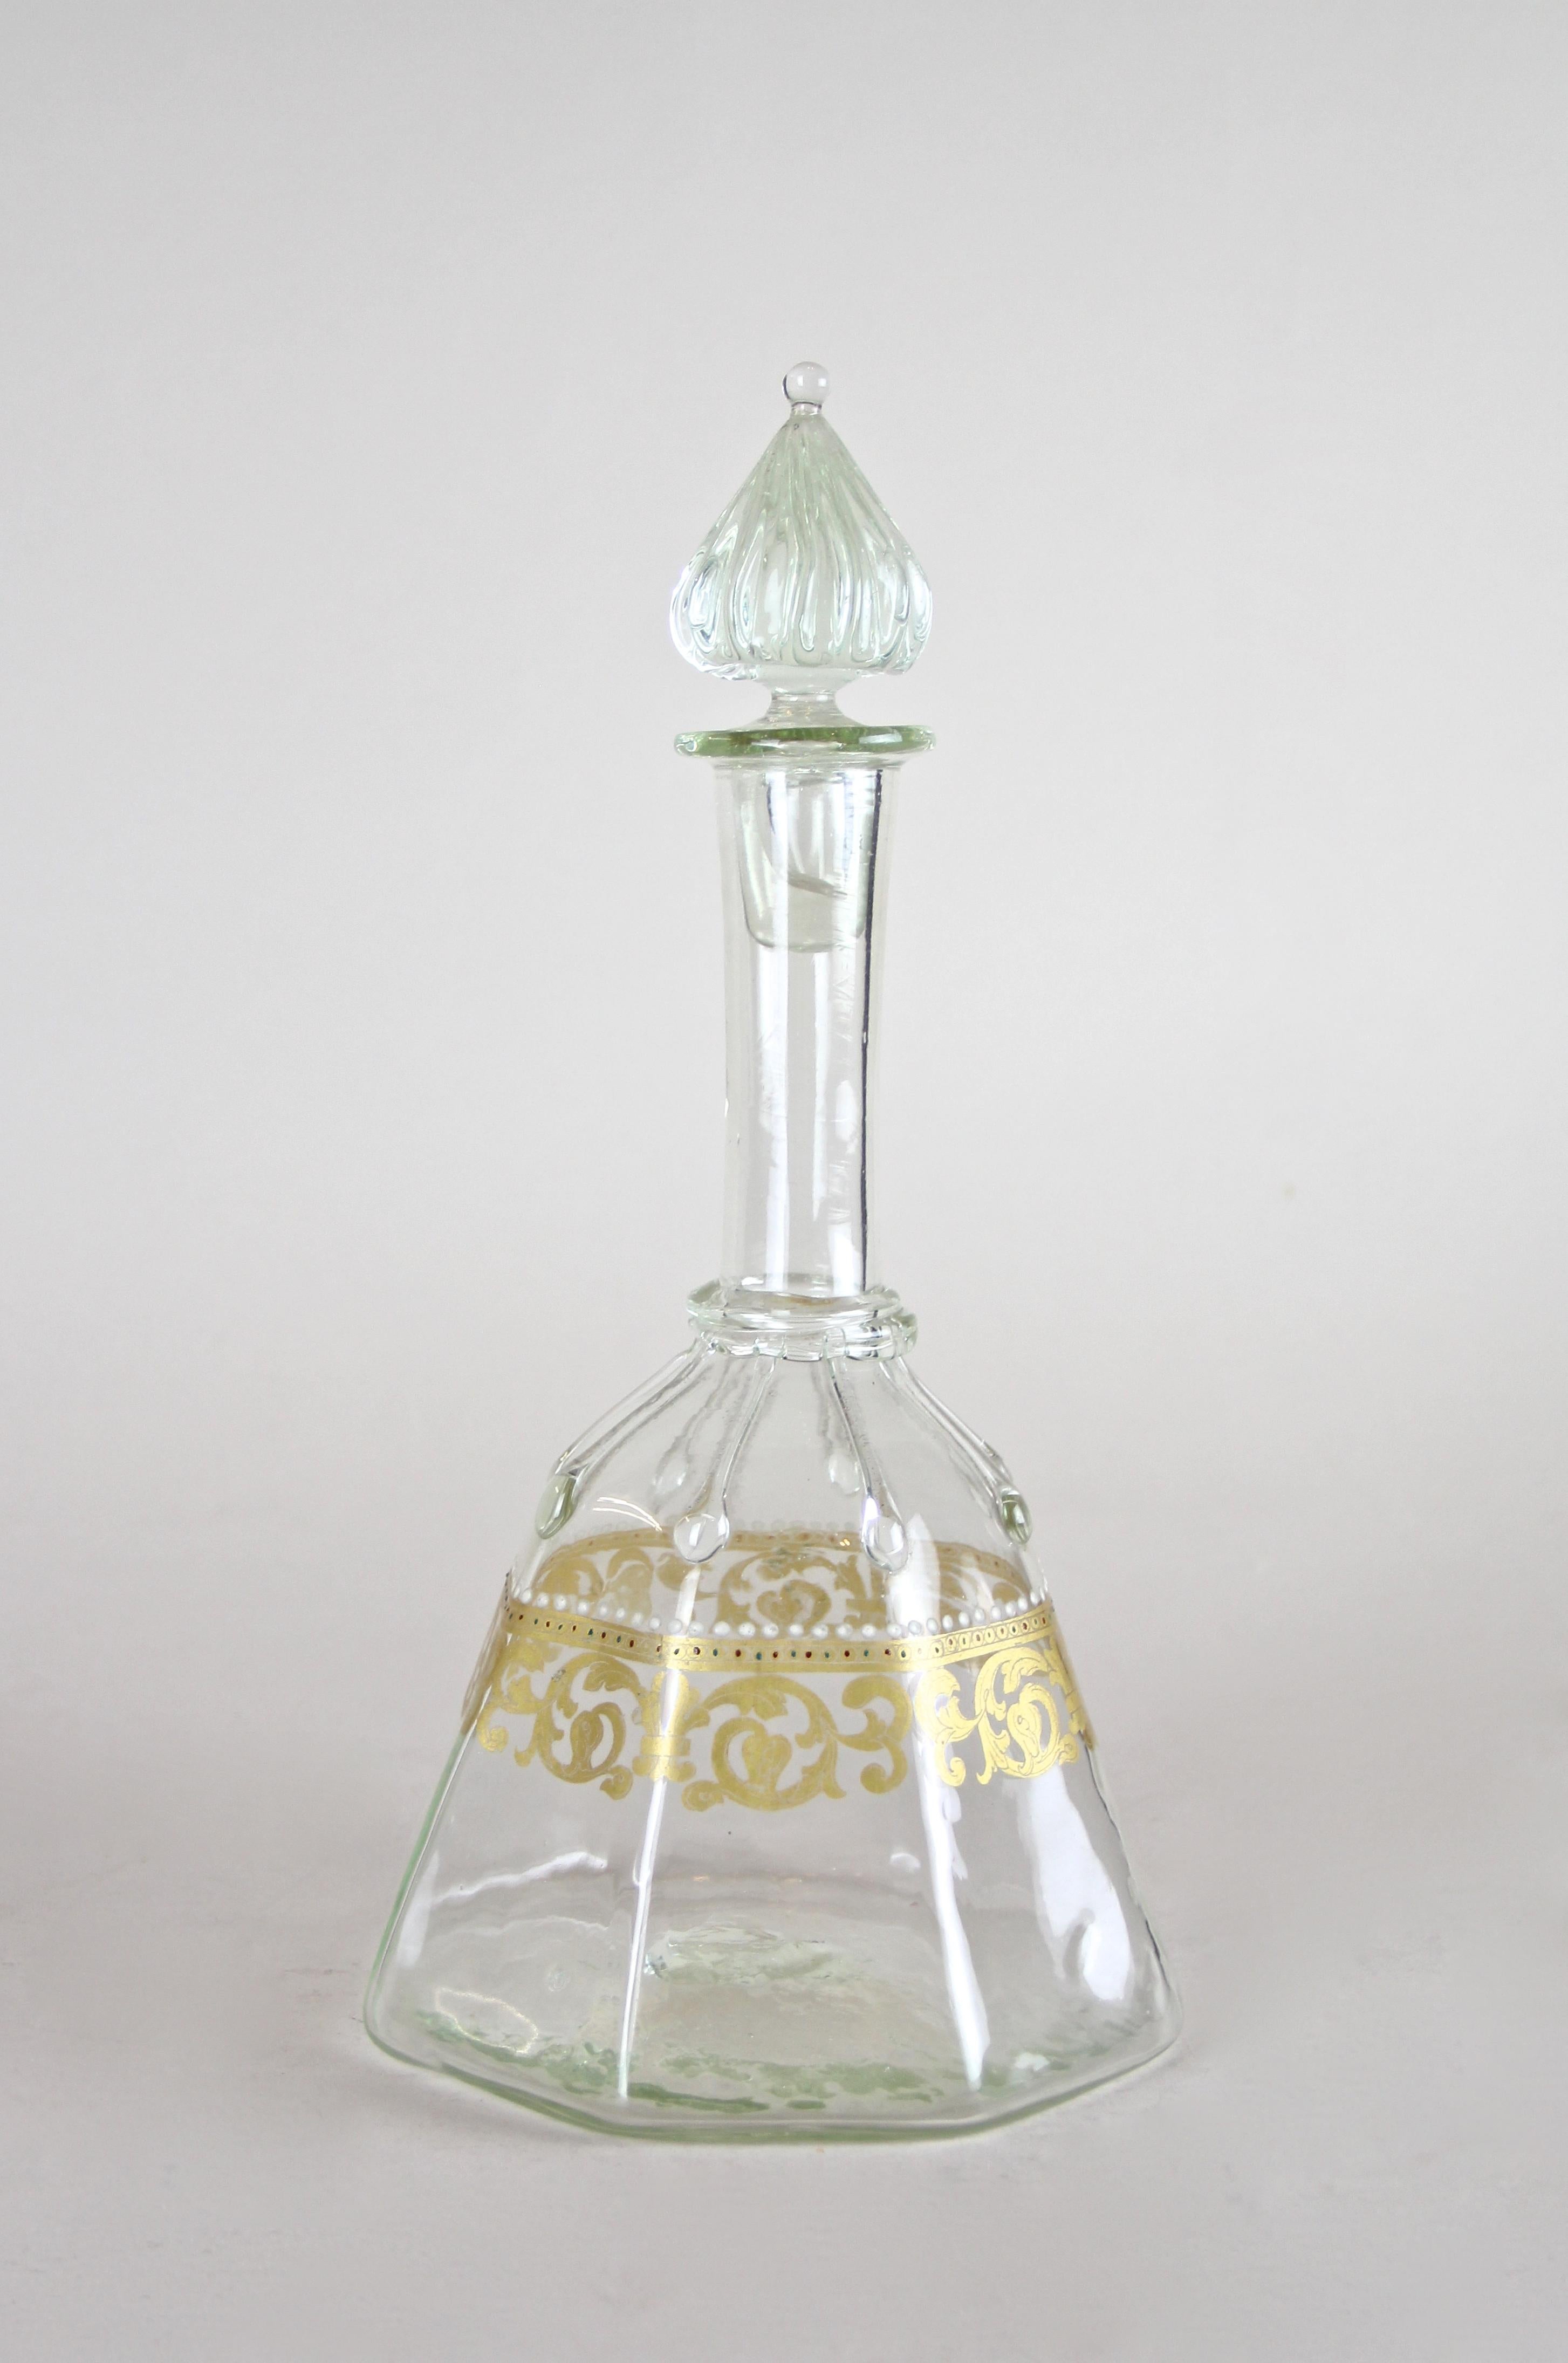 Graceful Austrian Biedermeier glass bottle with lid out of Vienna, the epicenter of this famous era. Made circa 1850, this decorative mouth blown glass bottle with a light green shine shows delicate golden design elements alongside very small enamel